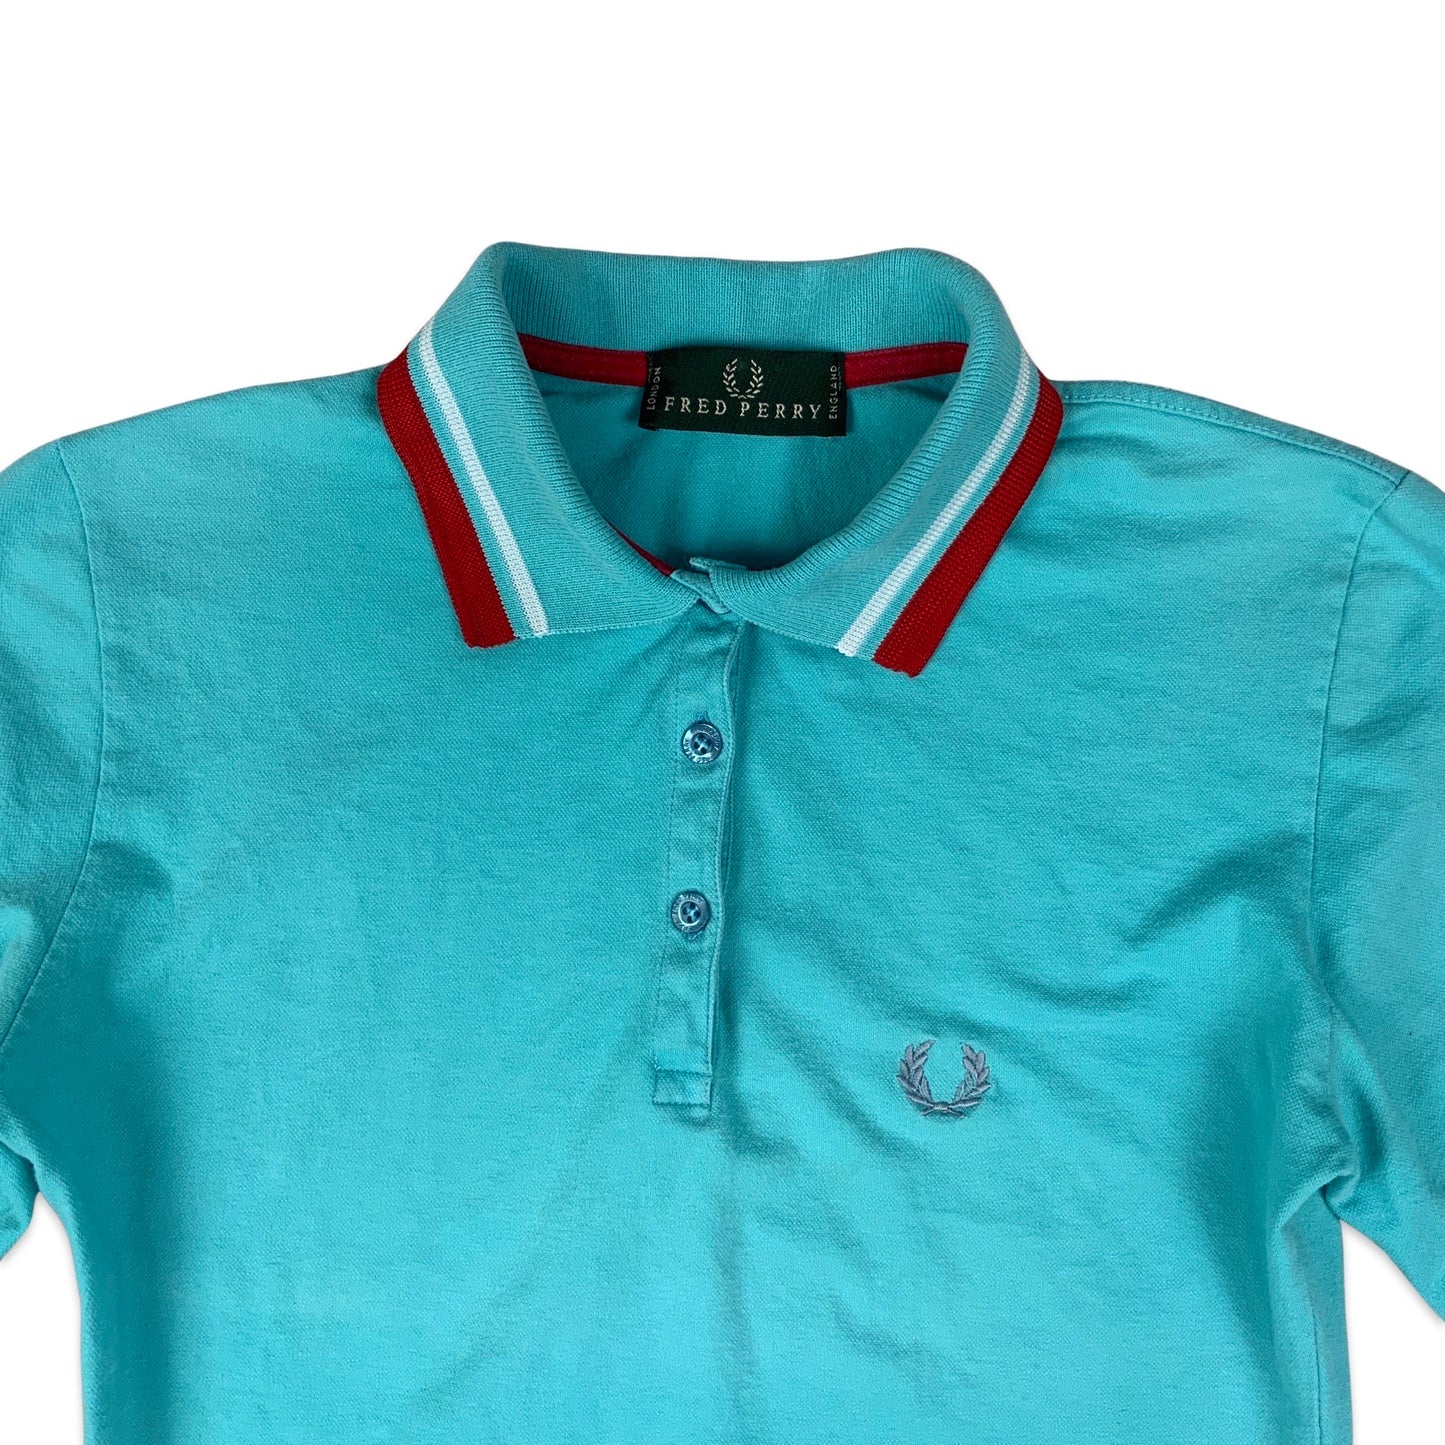 Vintage Fred Perry Teal Red & White Rugby Shirt 6 8